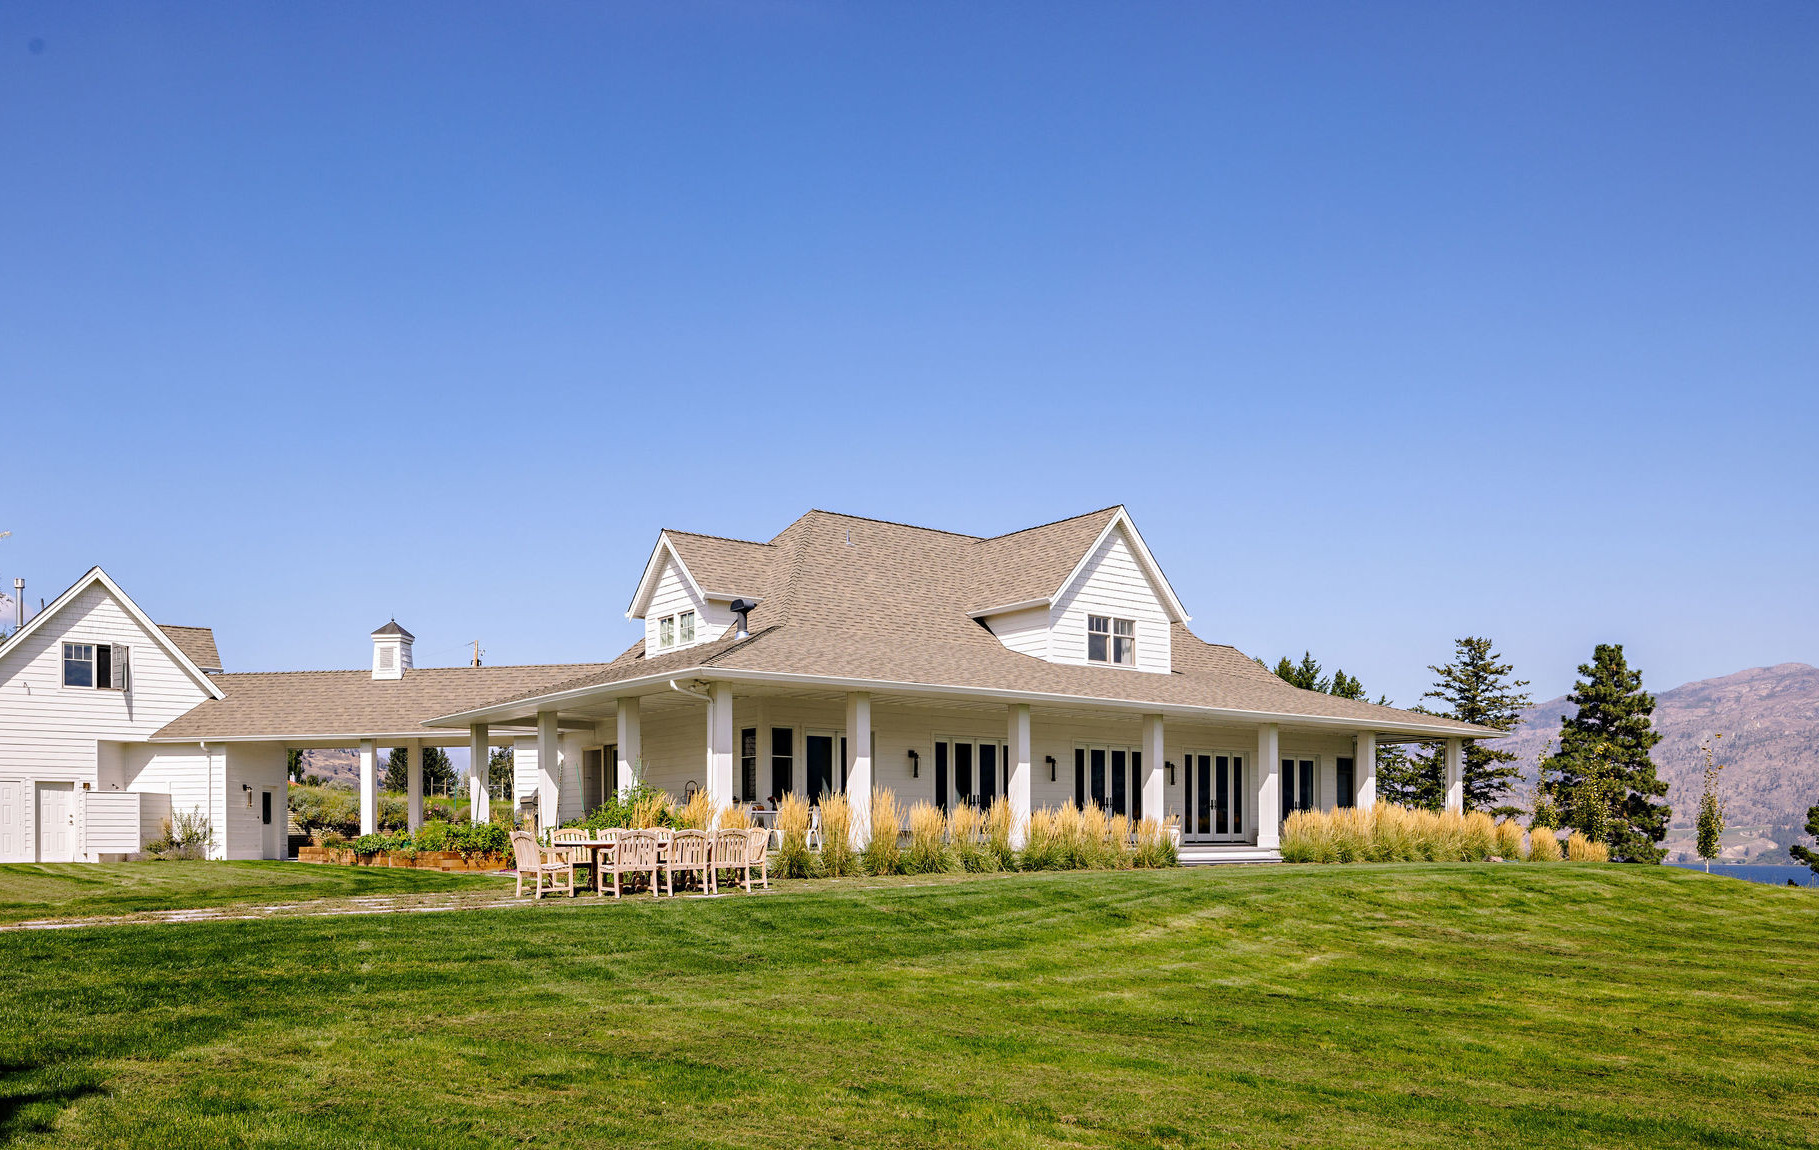 Image of the exterior of a white farmhouse with a wraparound porch and a separated garage connected by a covered walkway. Renovated by Whitfield Homes.